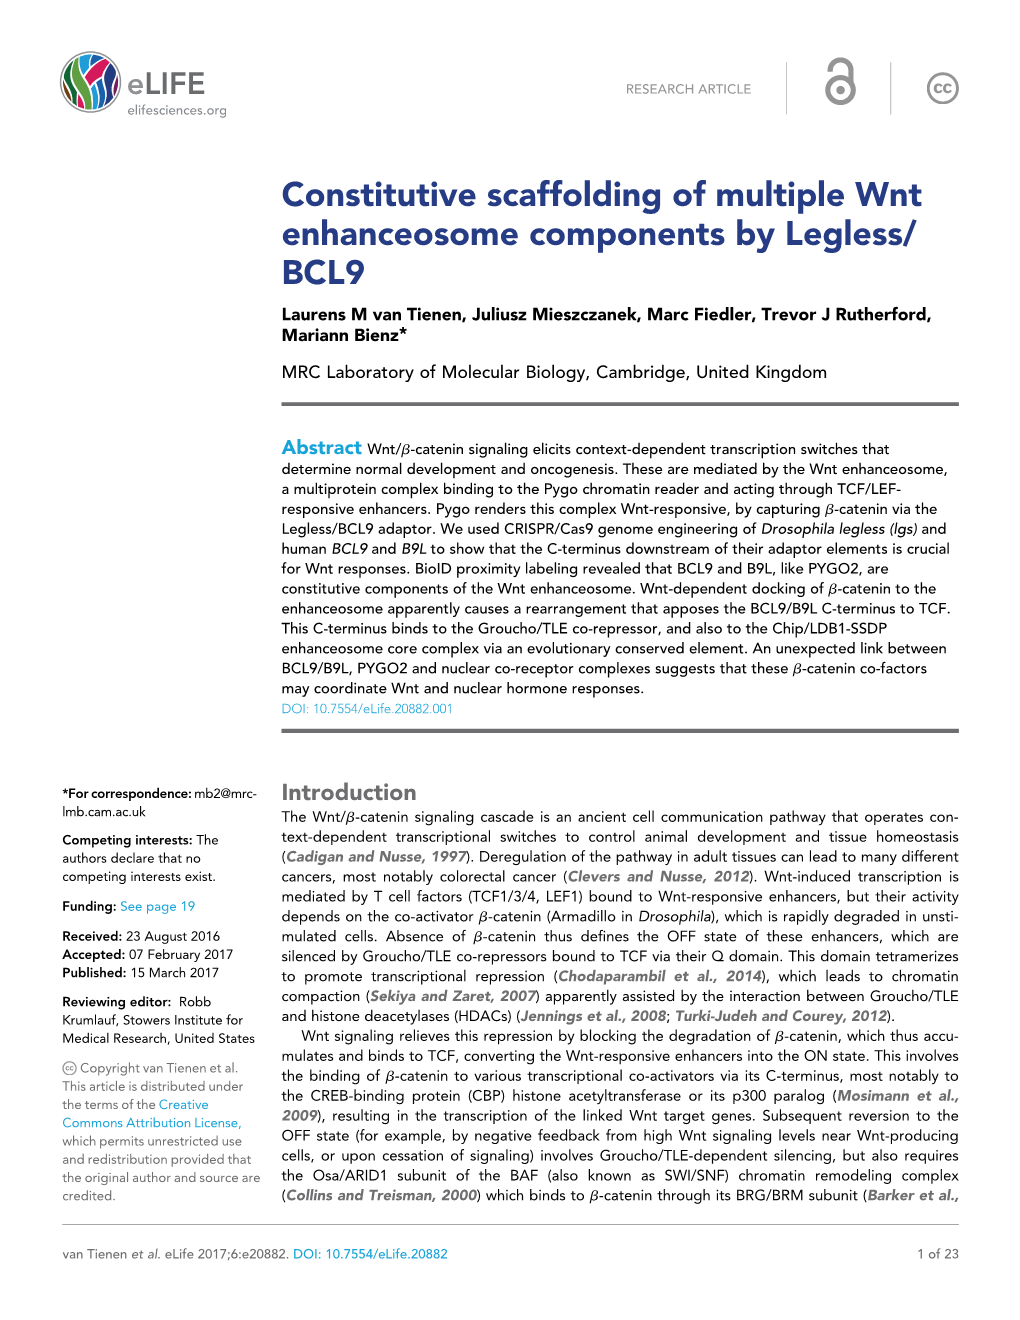 Constitutive Scaffolding of Multiple Wnt Enhanceosome Components By